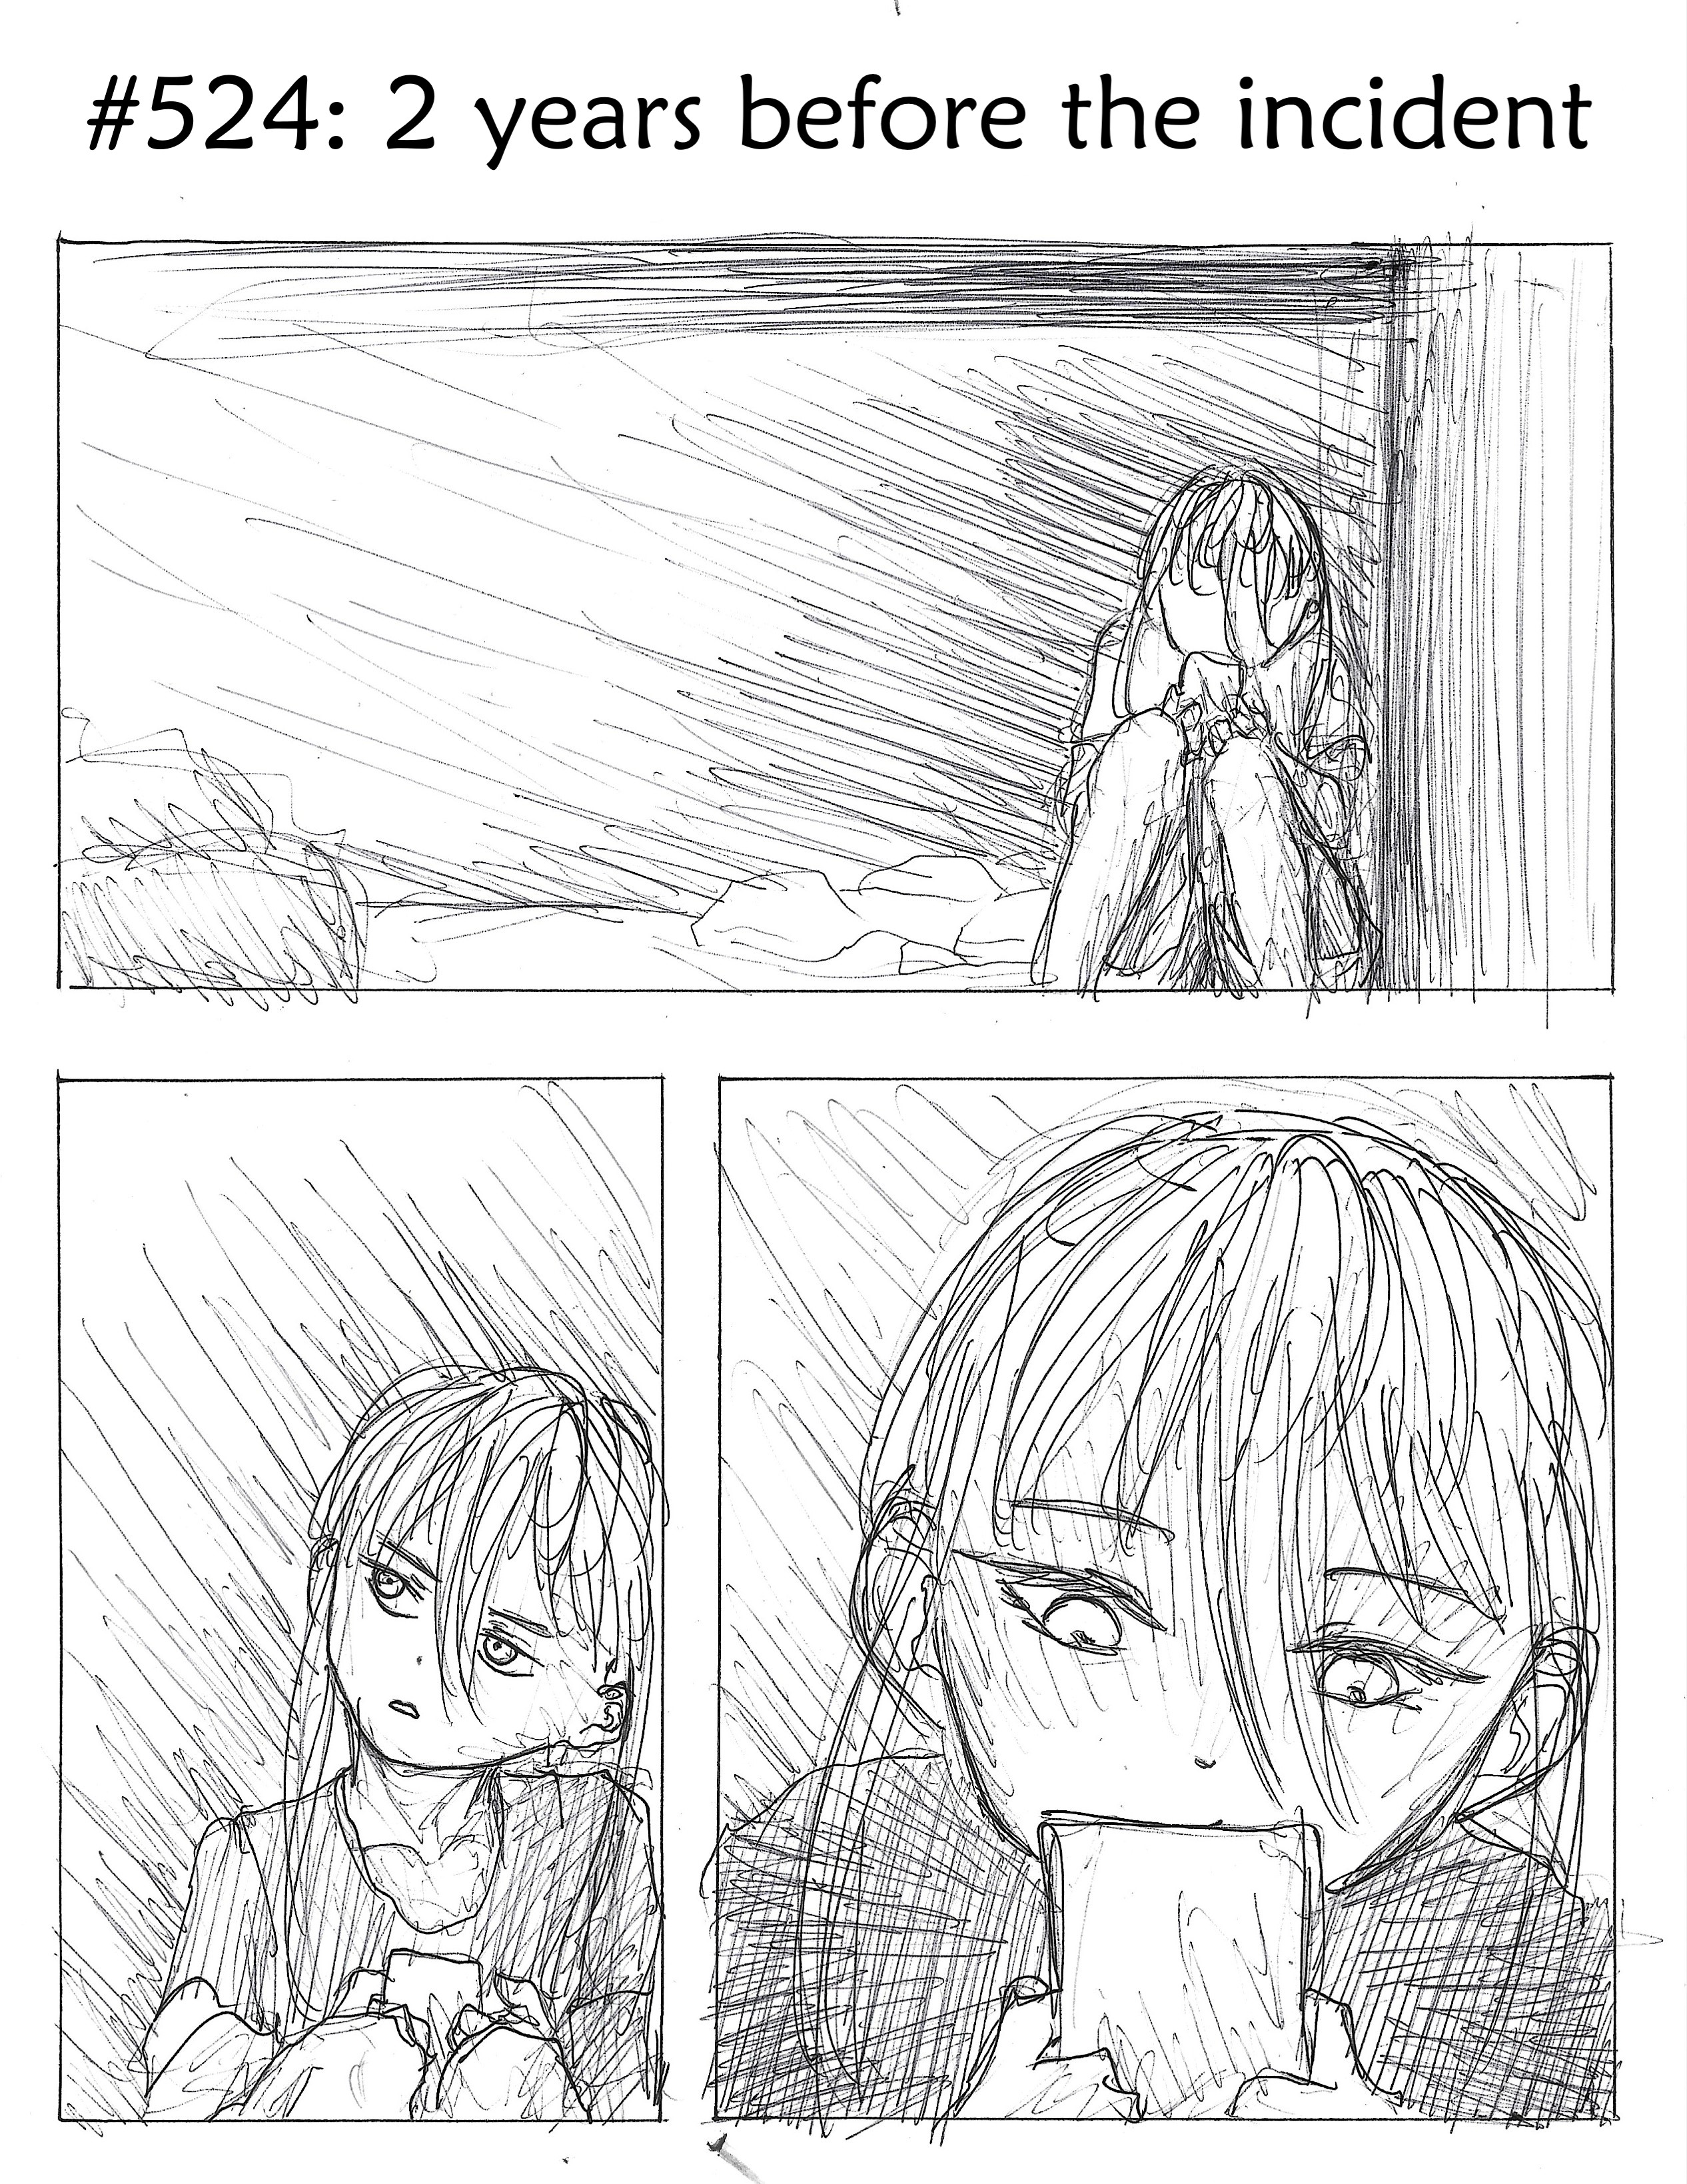 Sound Asleep: Forgotten Memories Vol.6 Chapter 524: 2 Years Before The Incident - Picture 1